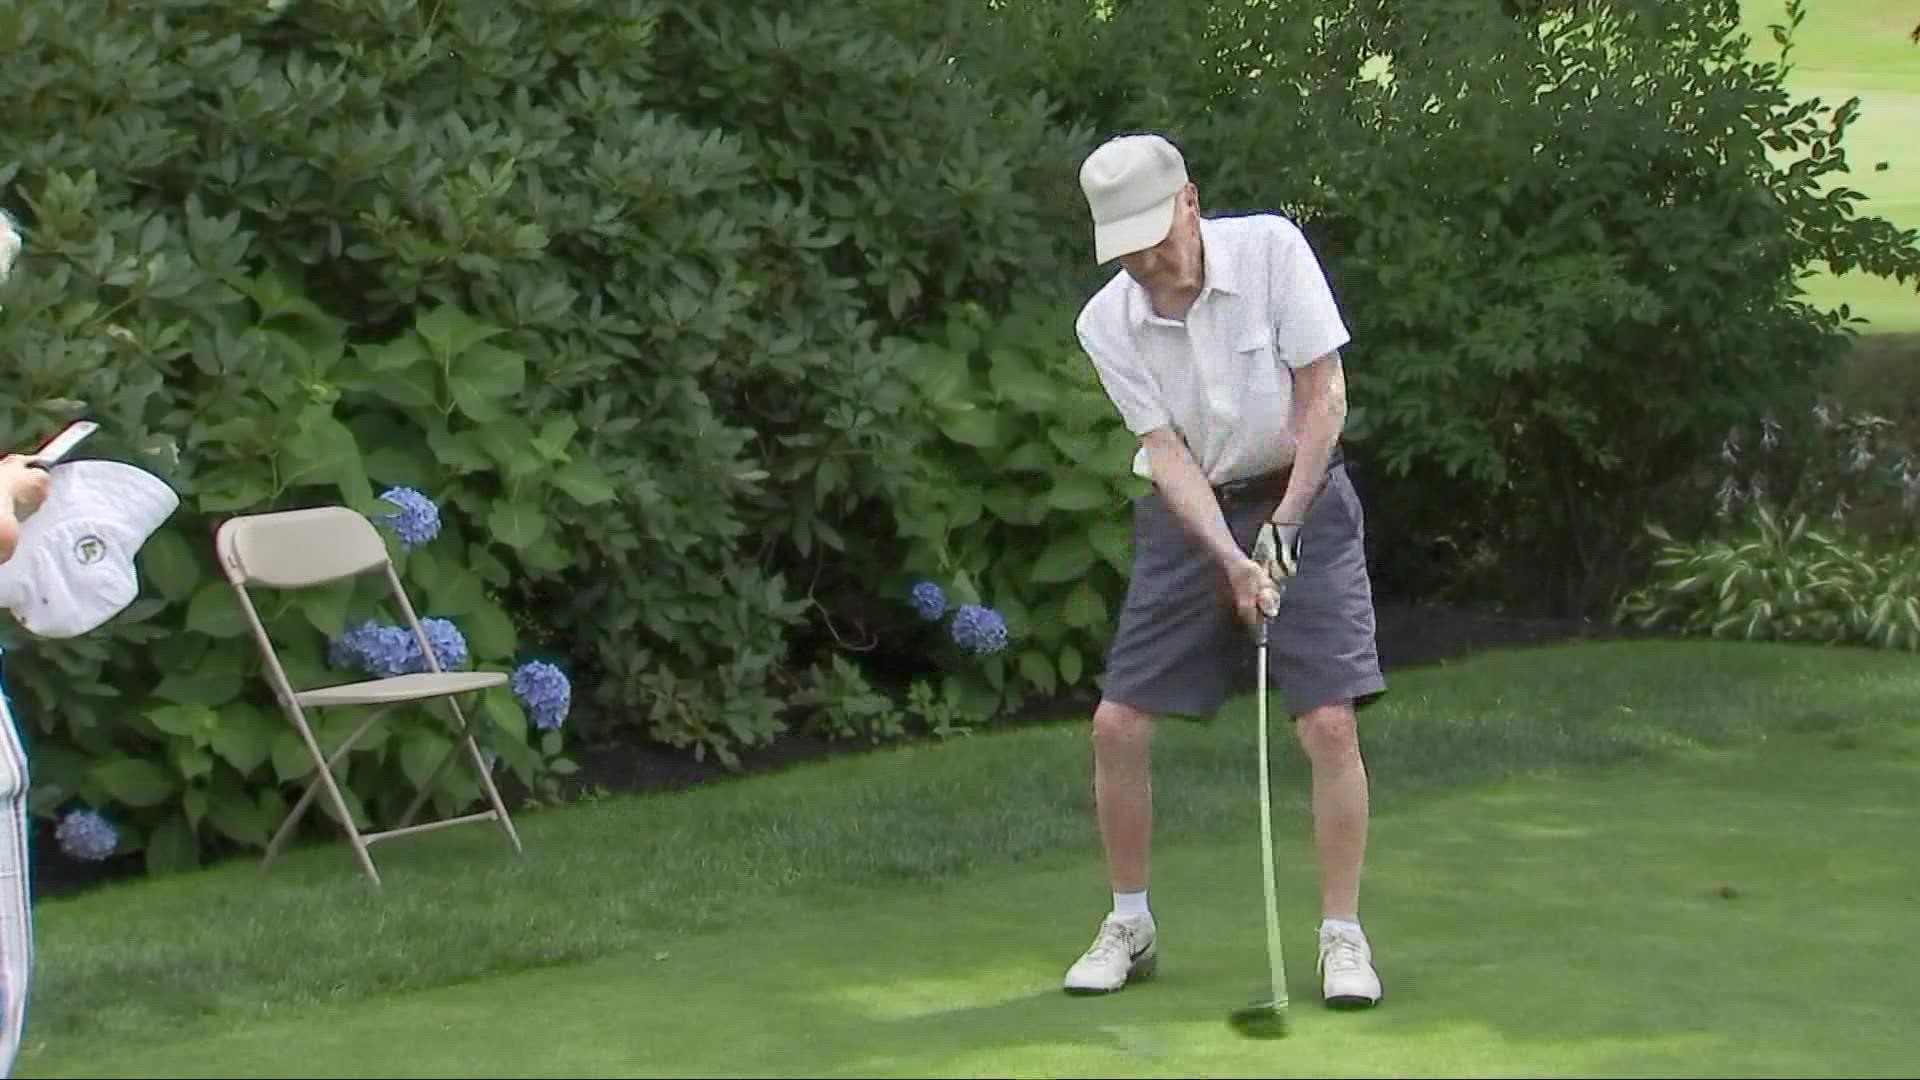 Today's Show Us Something Good comes to us from Massachusetts, where a 100-year-old man recently competed in a father-son golf tournament.